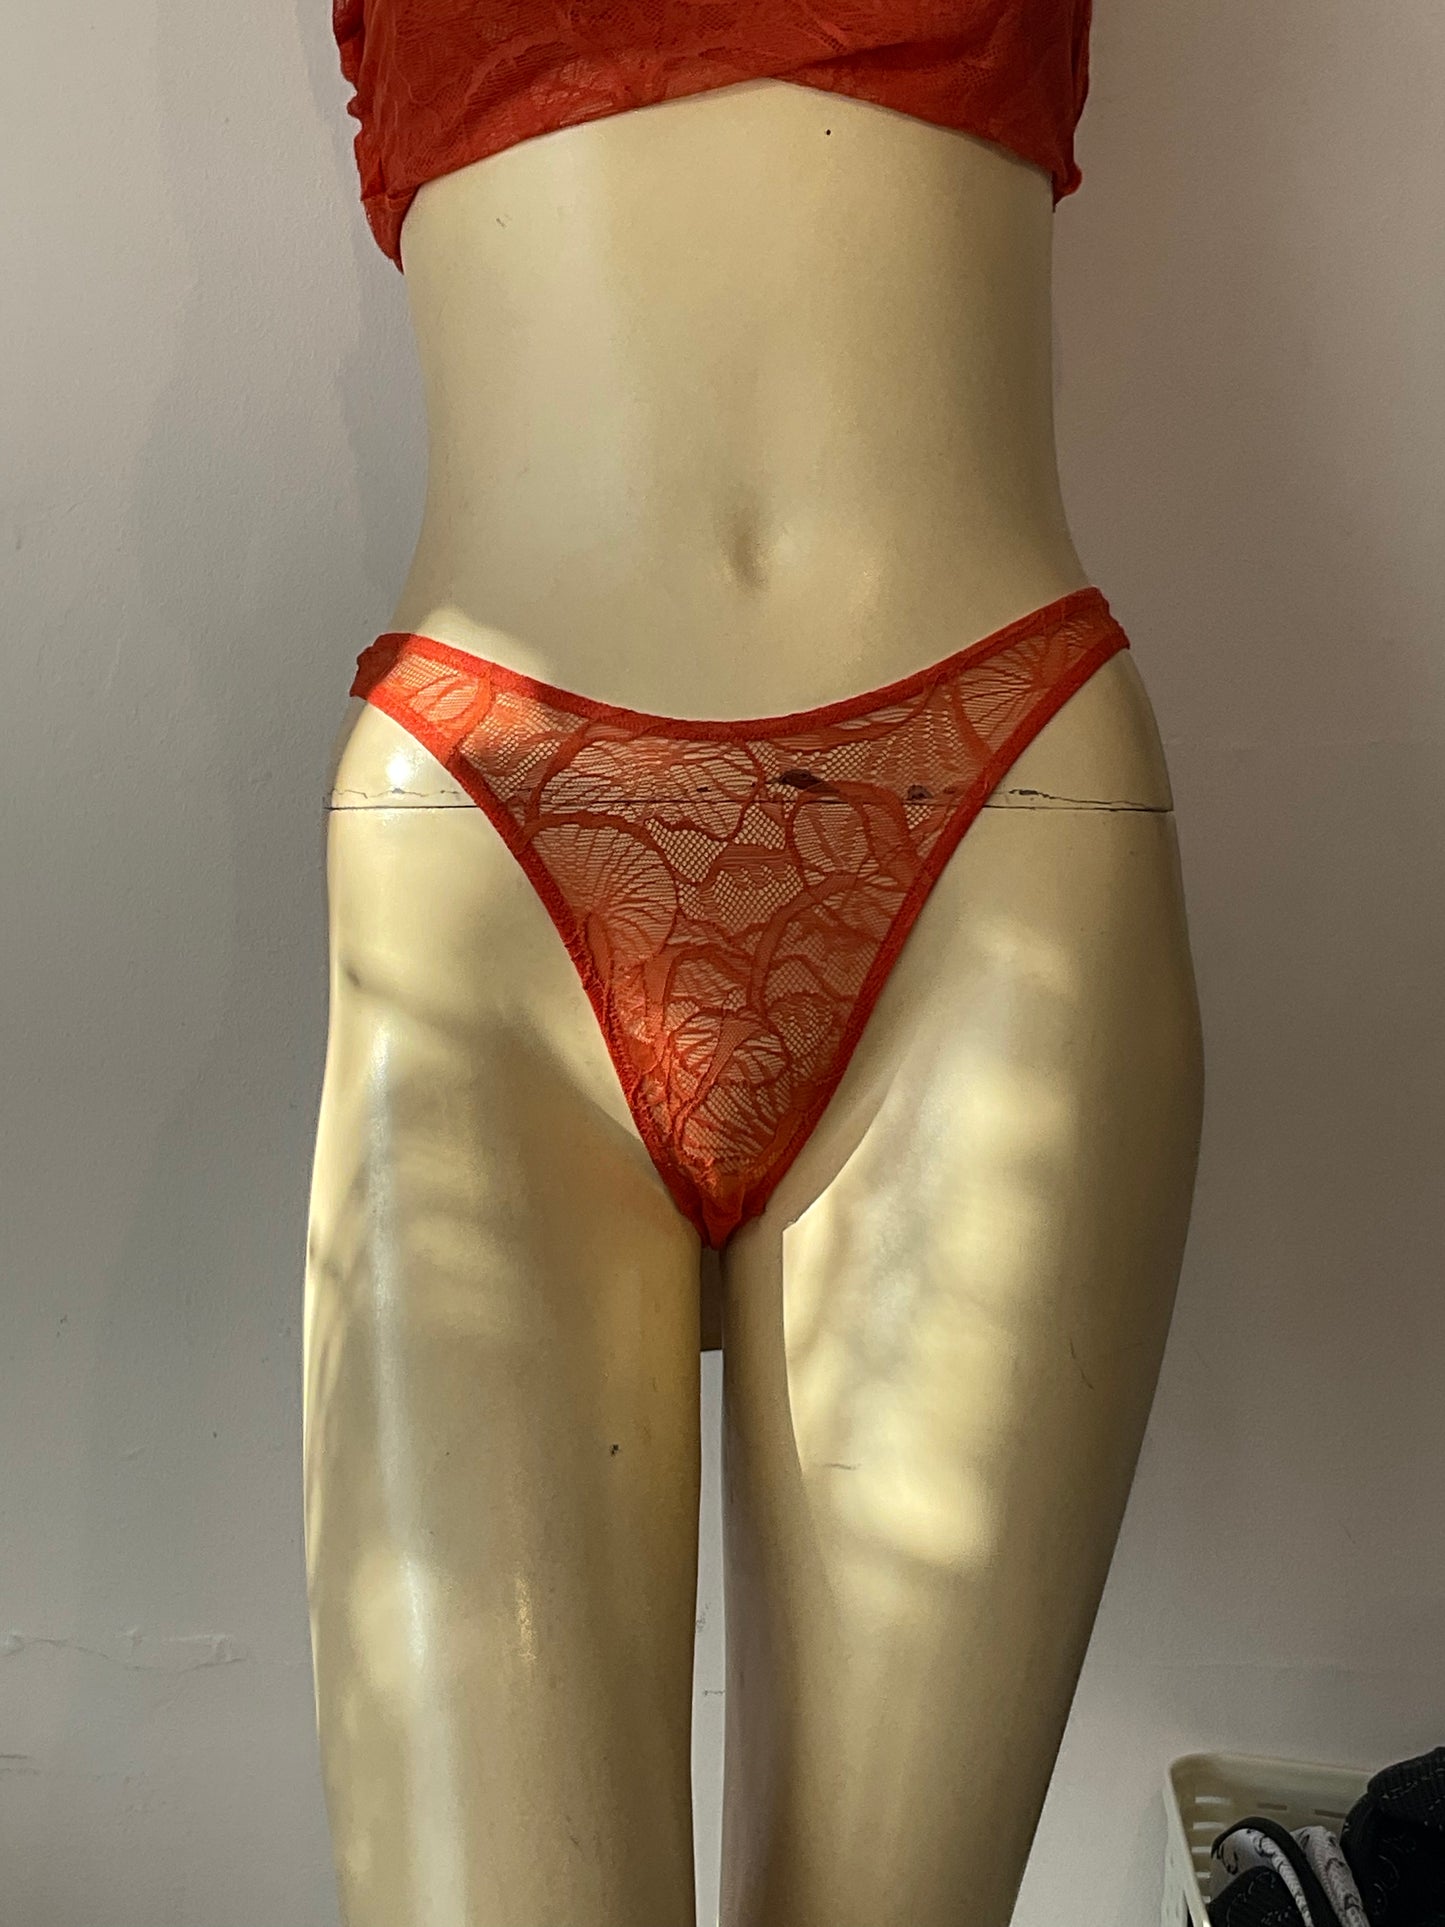 Go Ask Alice Vintage Thong BY Only Hearts in Juniper & Mycena - S-L